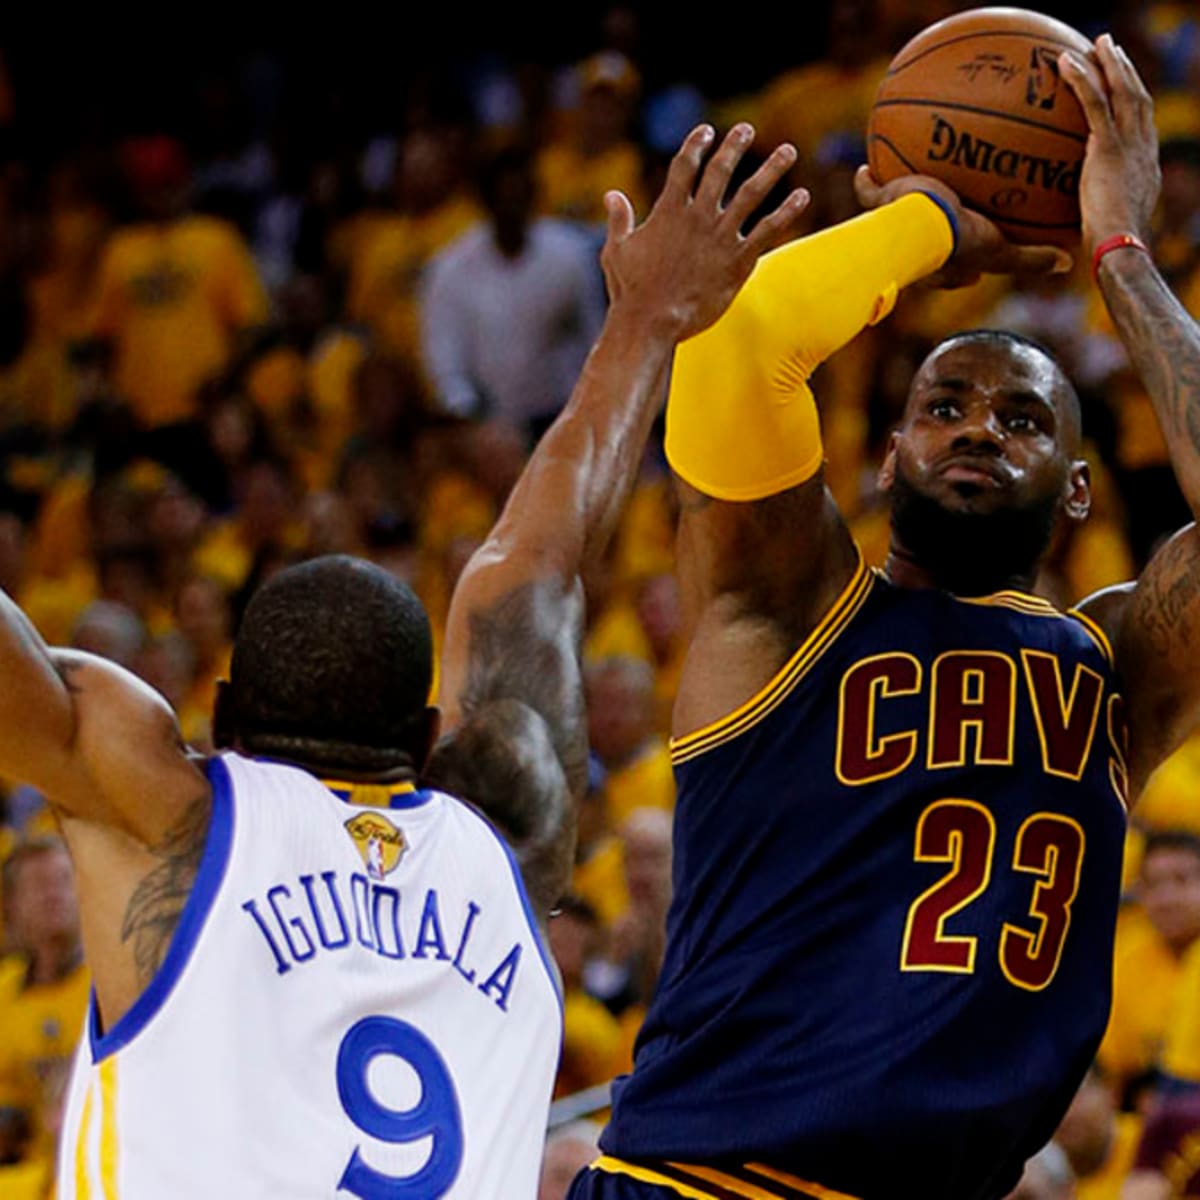 Cavs-Warriors rivalry stands on the shoulders of Celtics-Lakers, Sports